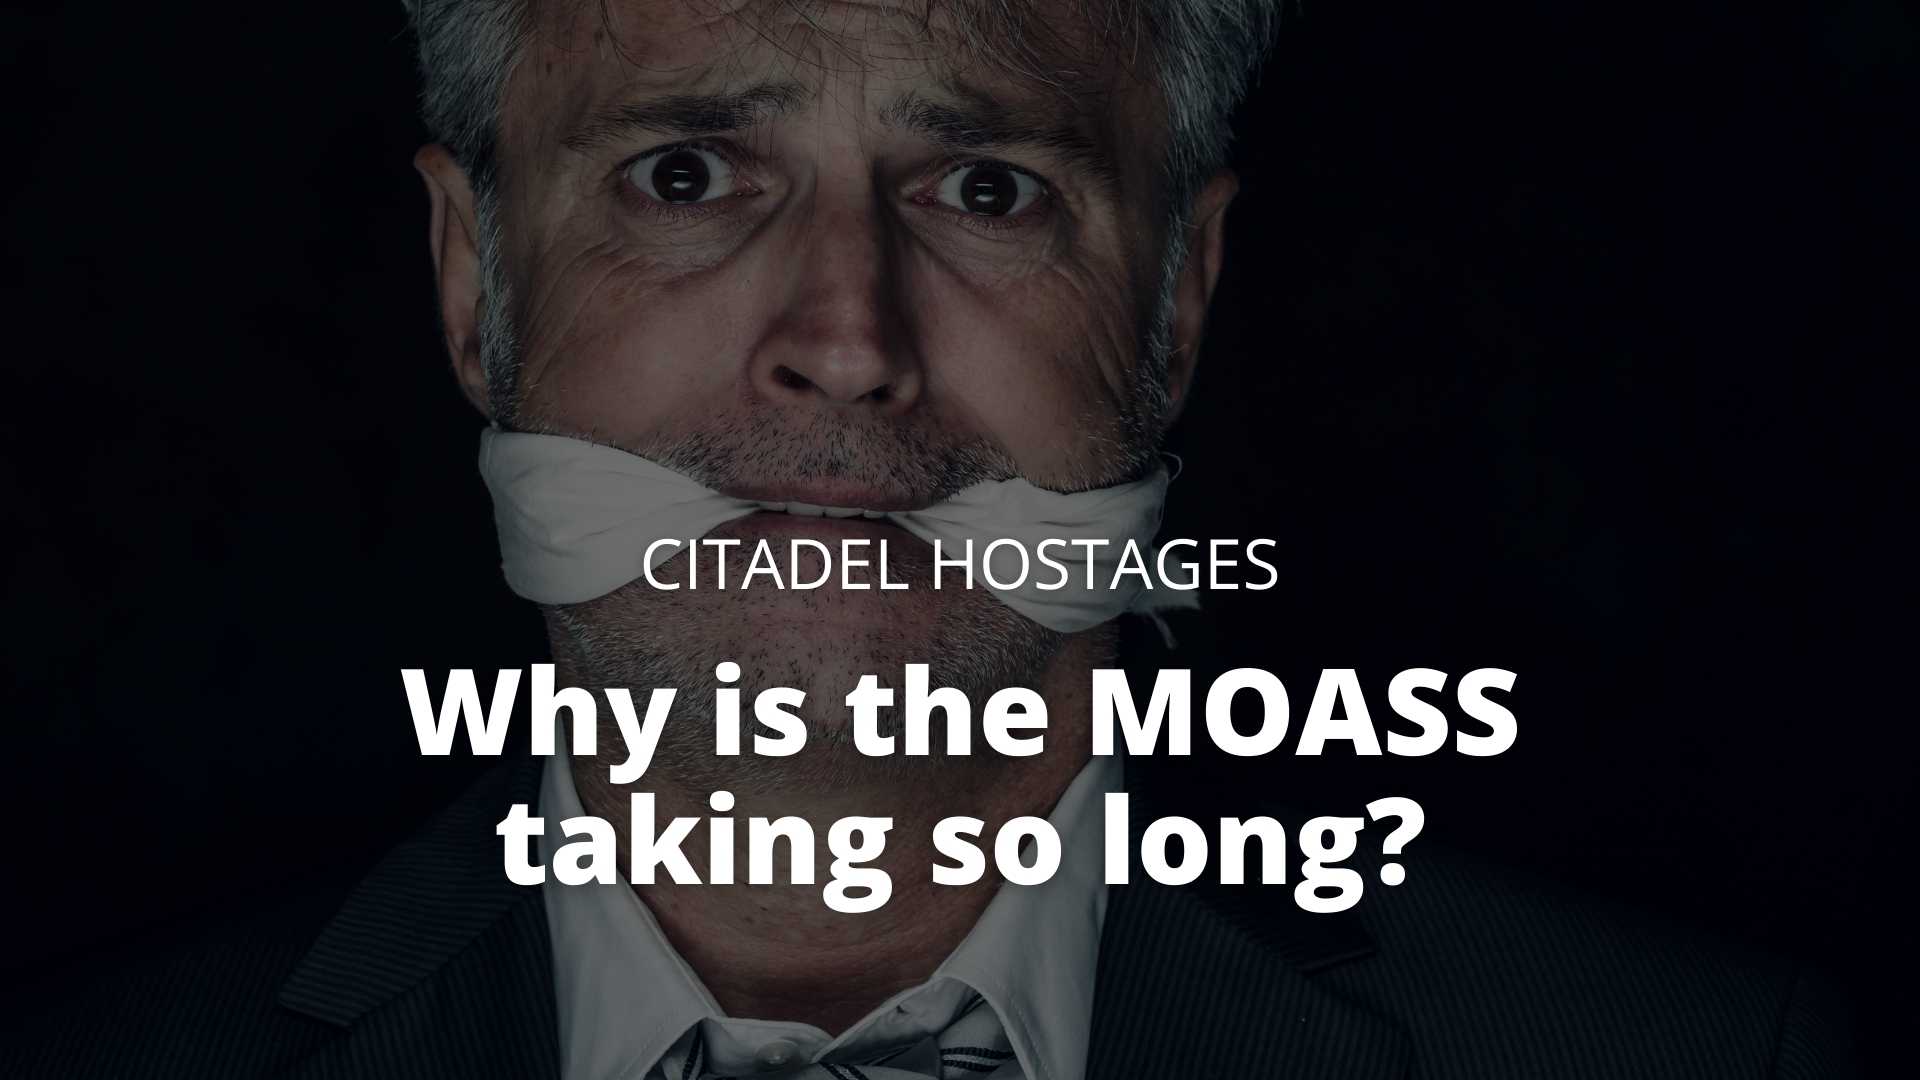 Citadel has hostages: explaining why the MOASS is taking so long